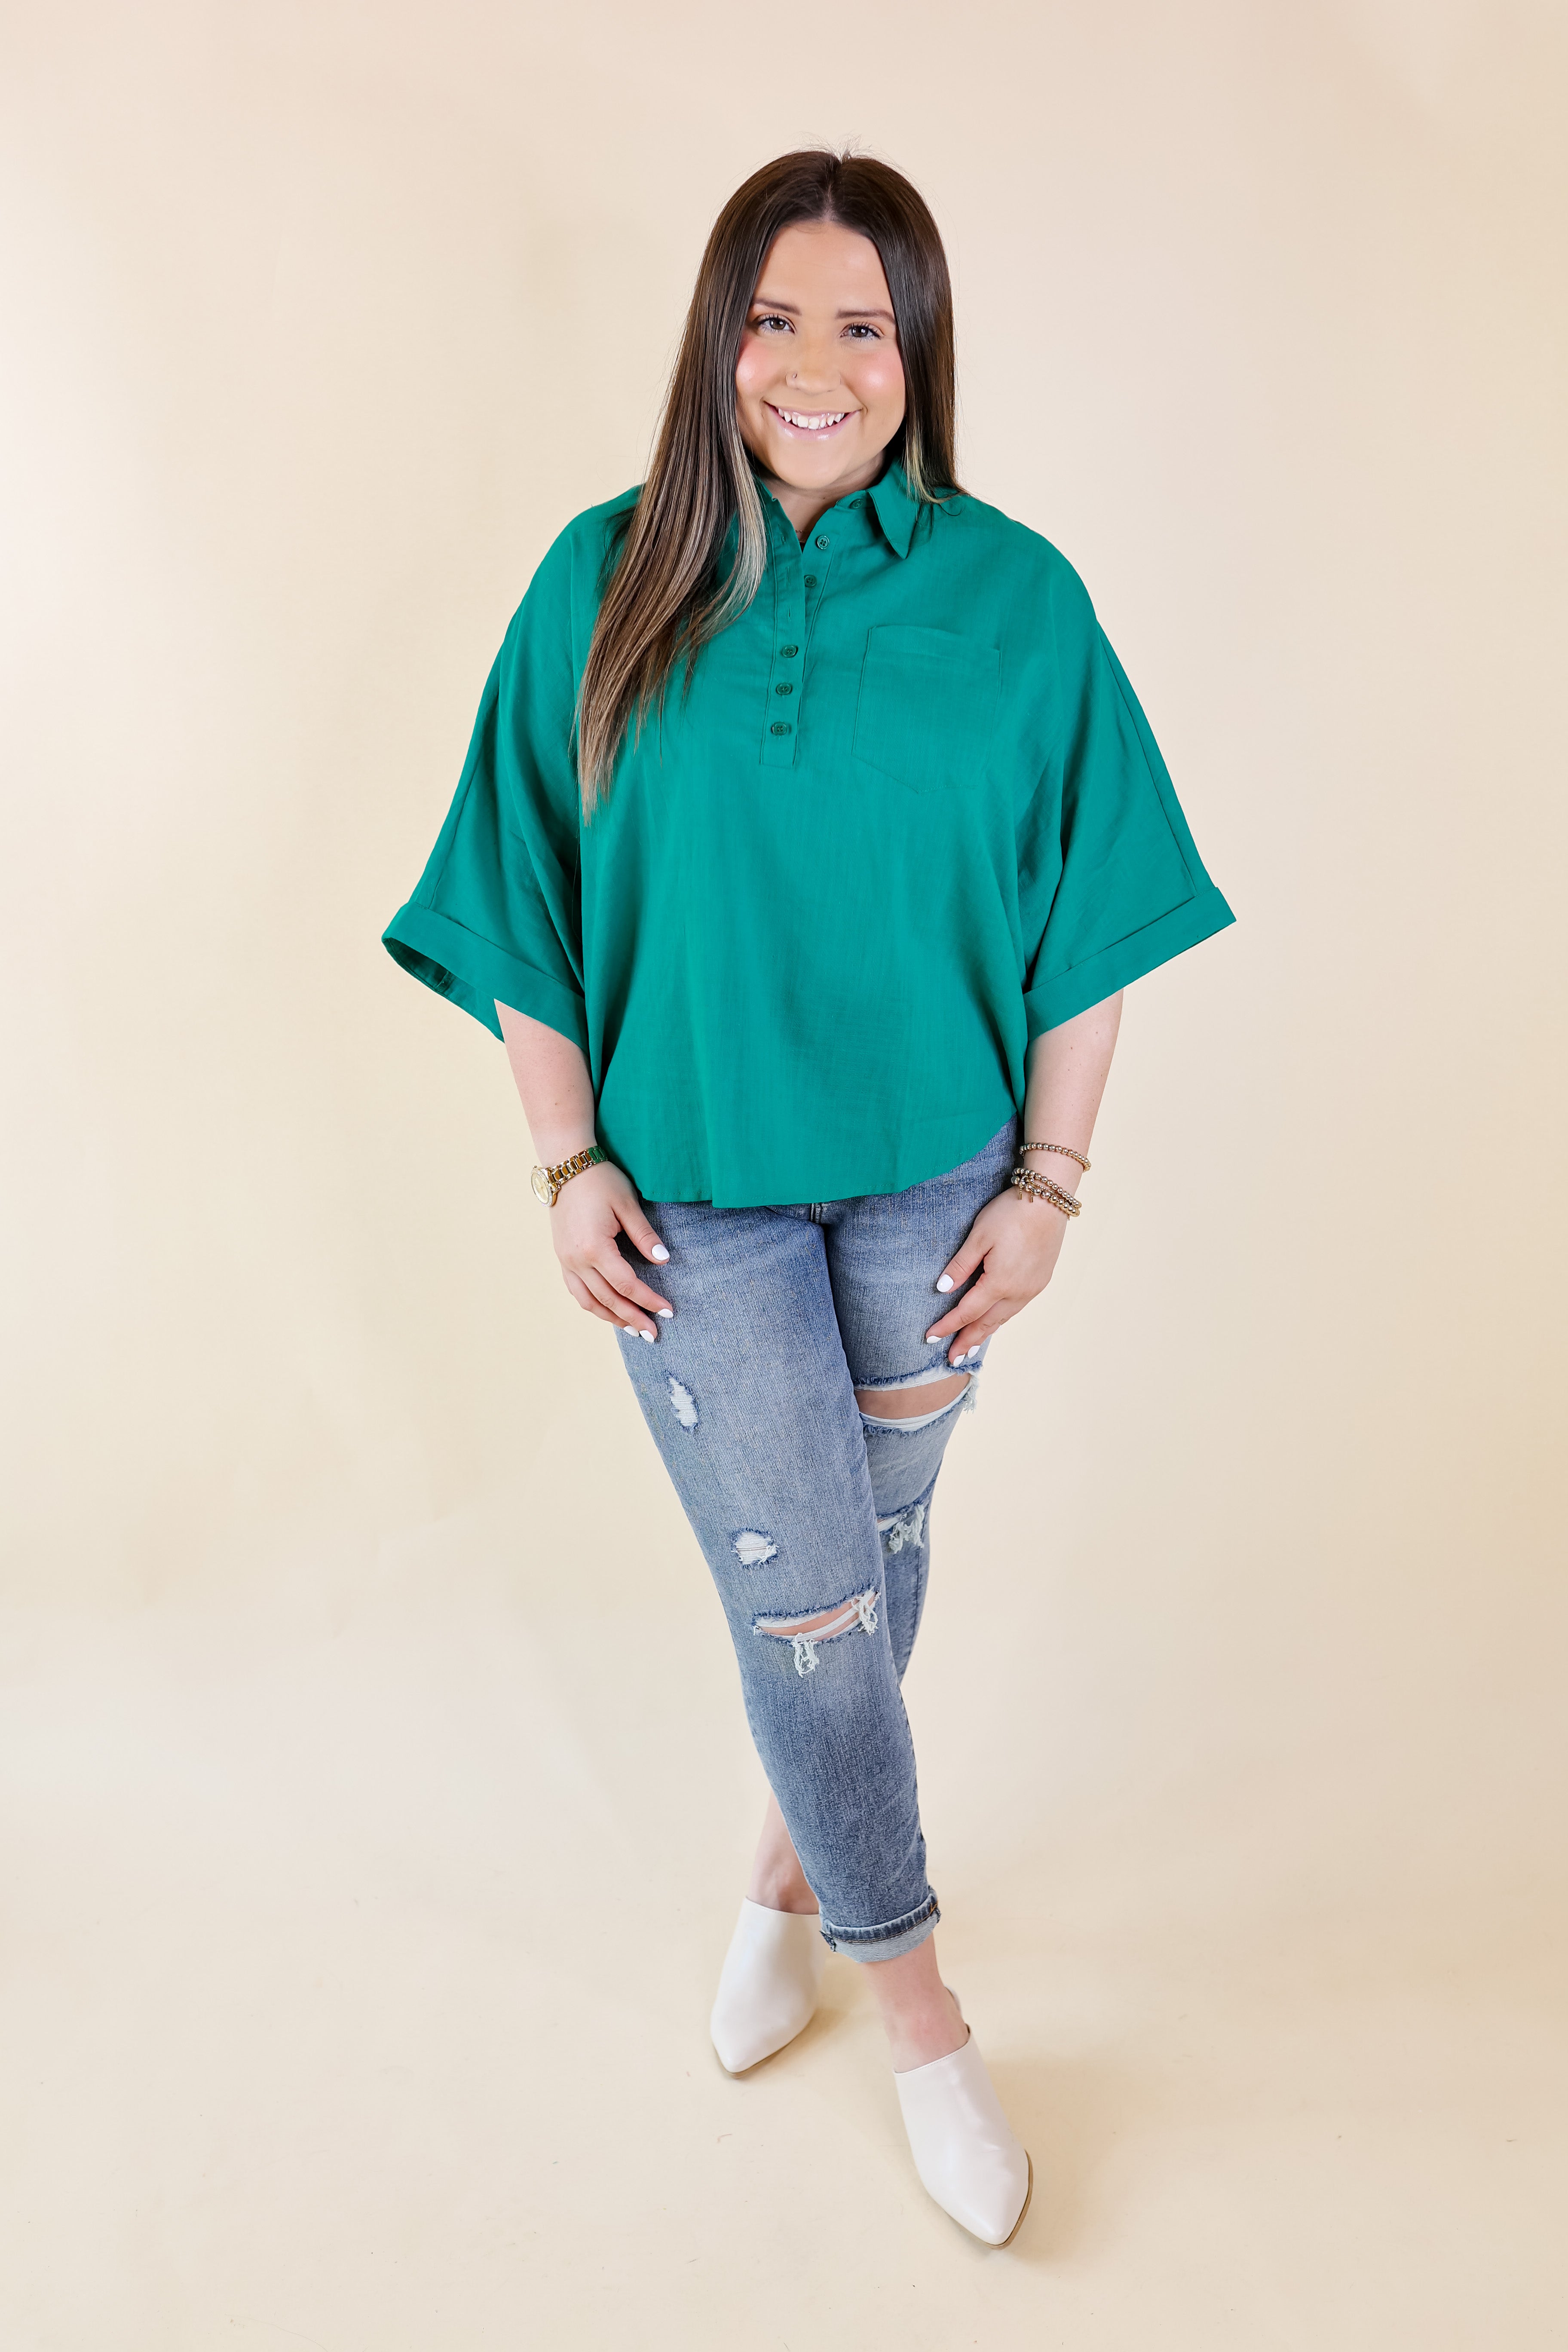 Sweet Surprise Half Button Up Poncho Top with Collared Neckline in Teal Green - Giddy Up Glamour Boutique